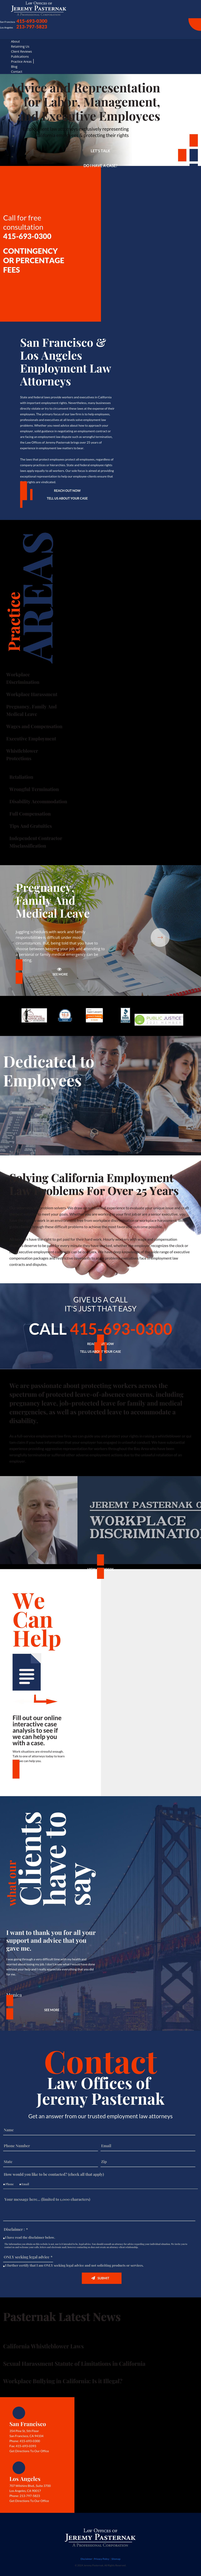 Law Offices of Jeremy Pasternak - San Francisco CA Lawyers